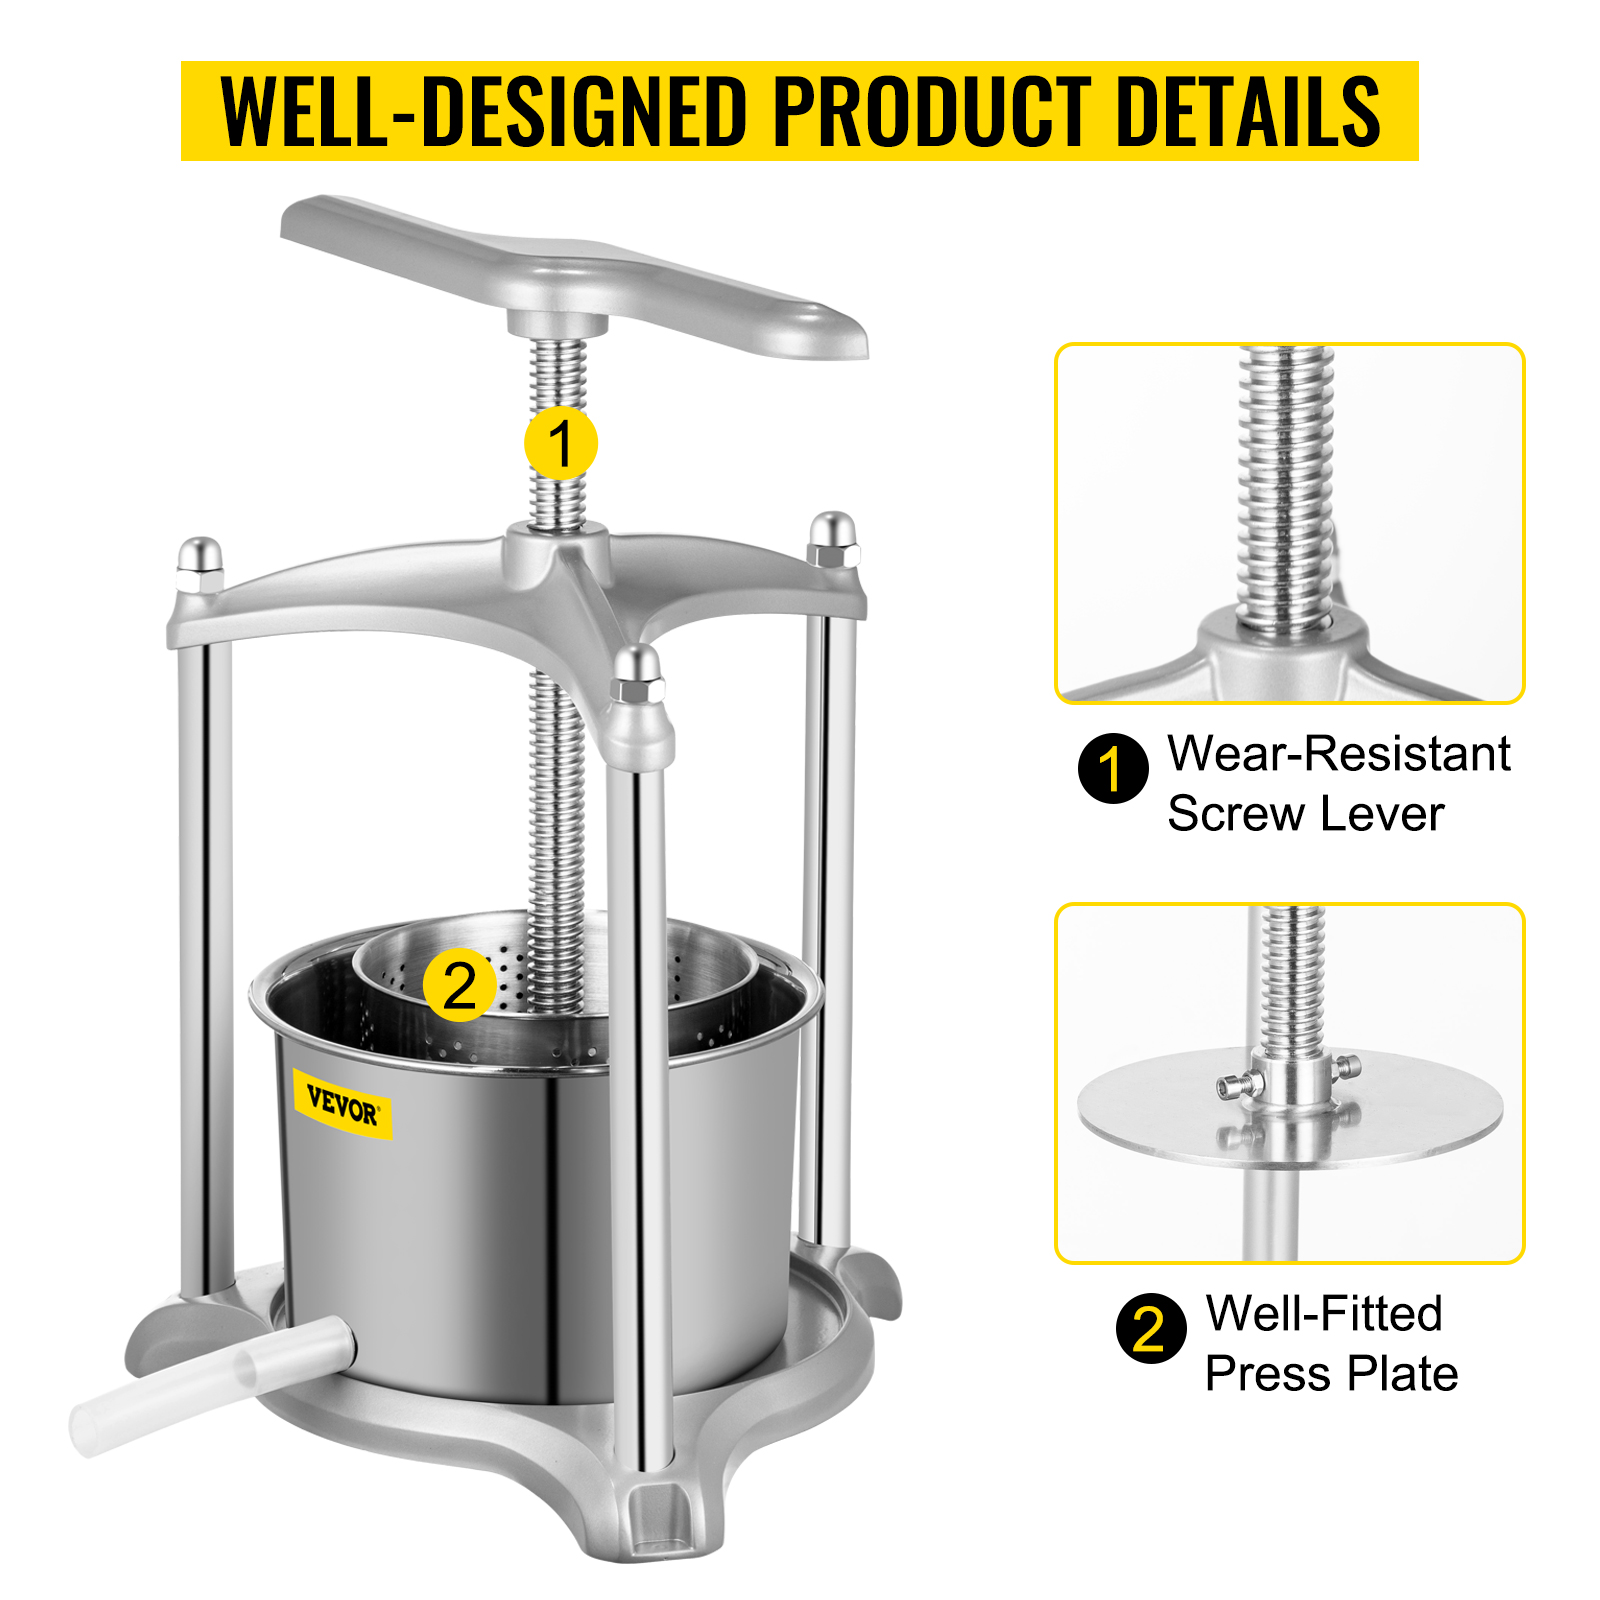 Wine Press Made in Italy Fruit Press Cheese Press 1,8 L with Stainless Steel Press Basket Mold 1,4 L 